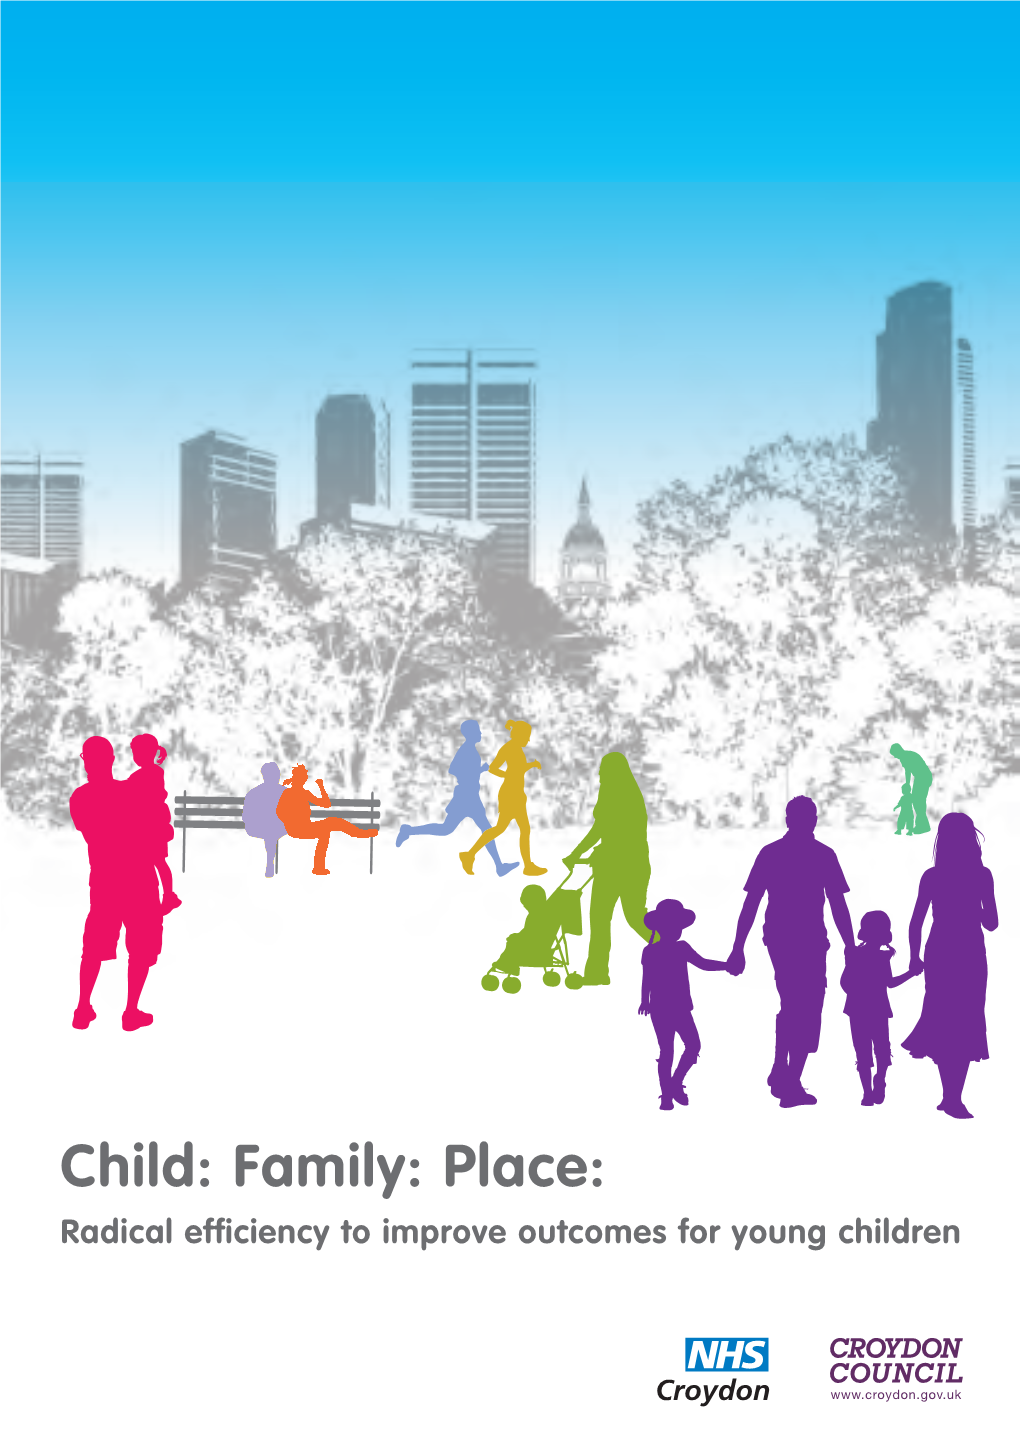 Child: Family: Place: Radical Efficiency to Improve Outcomes for Young Children